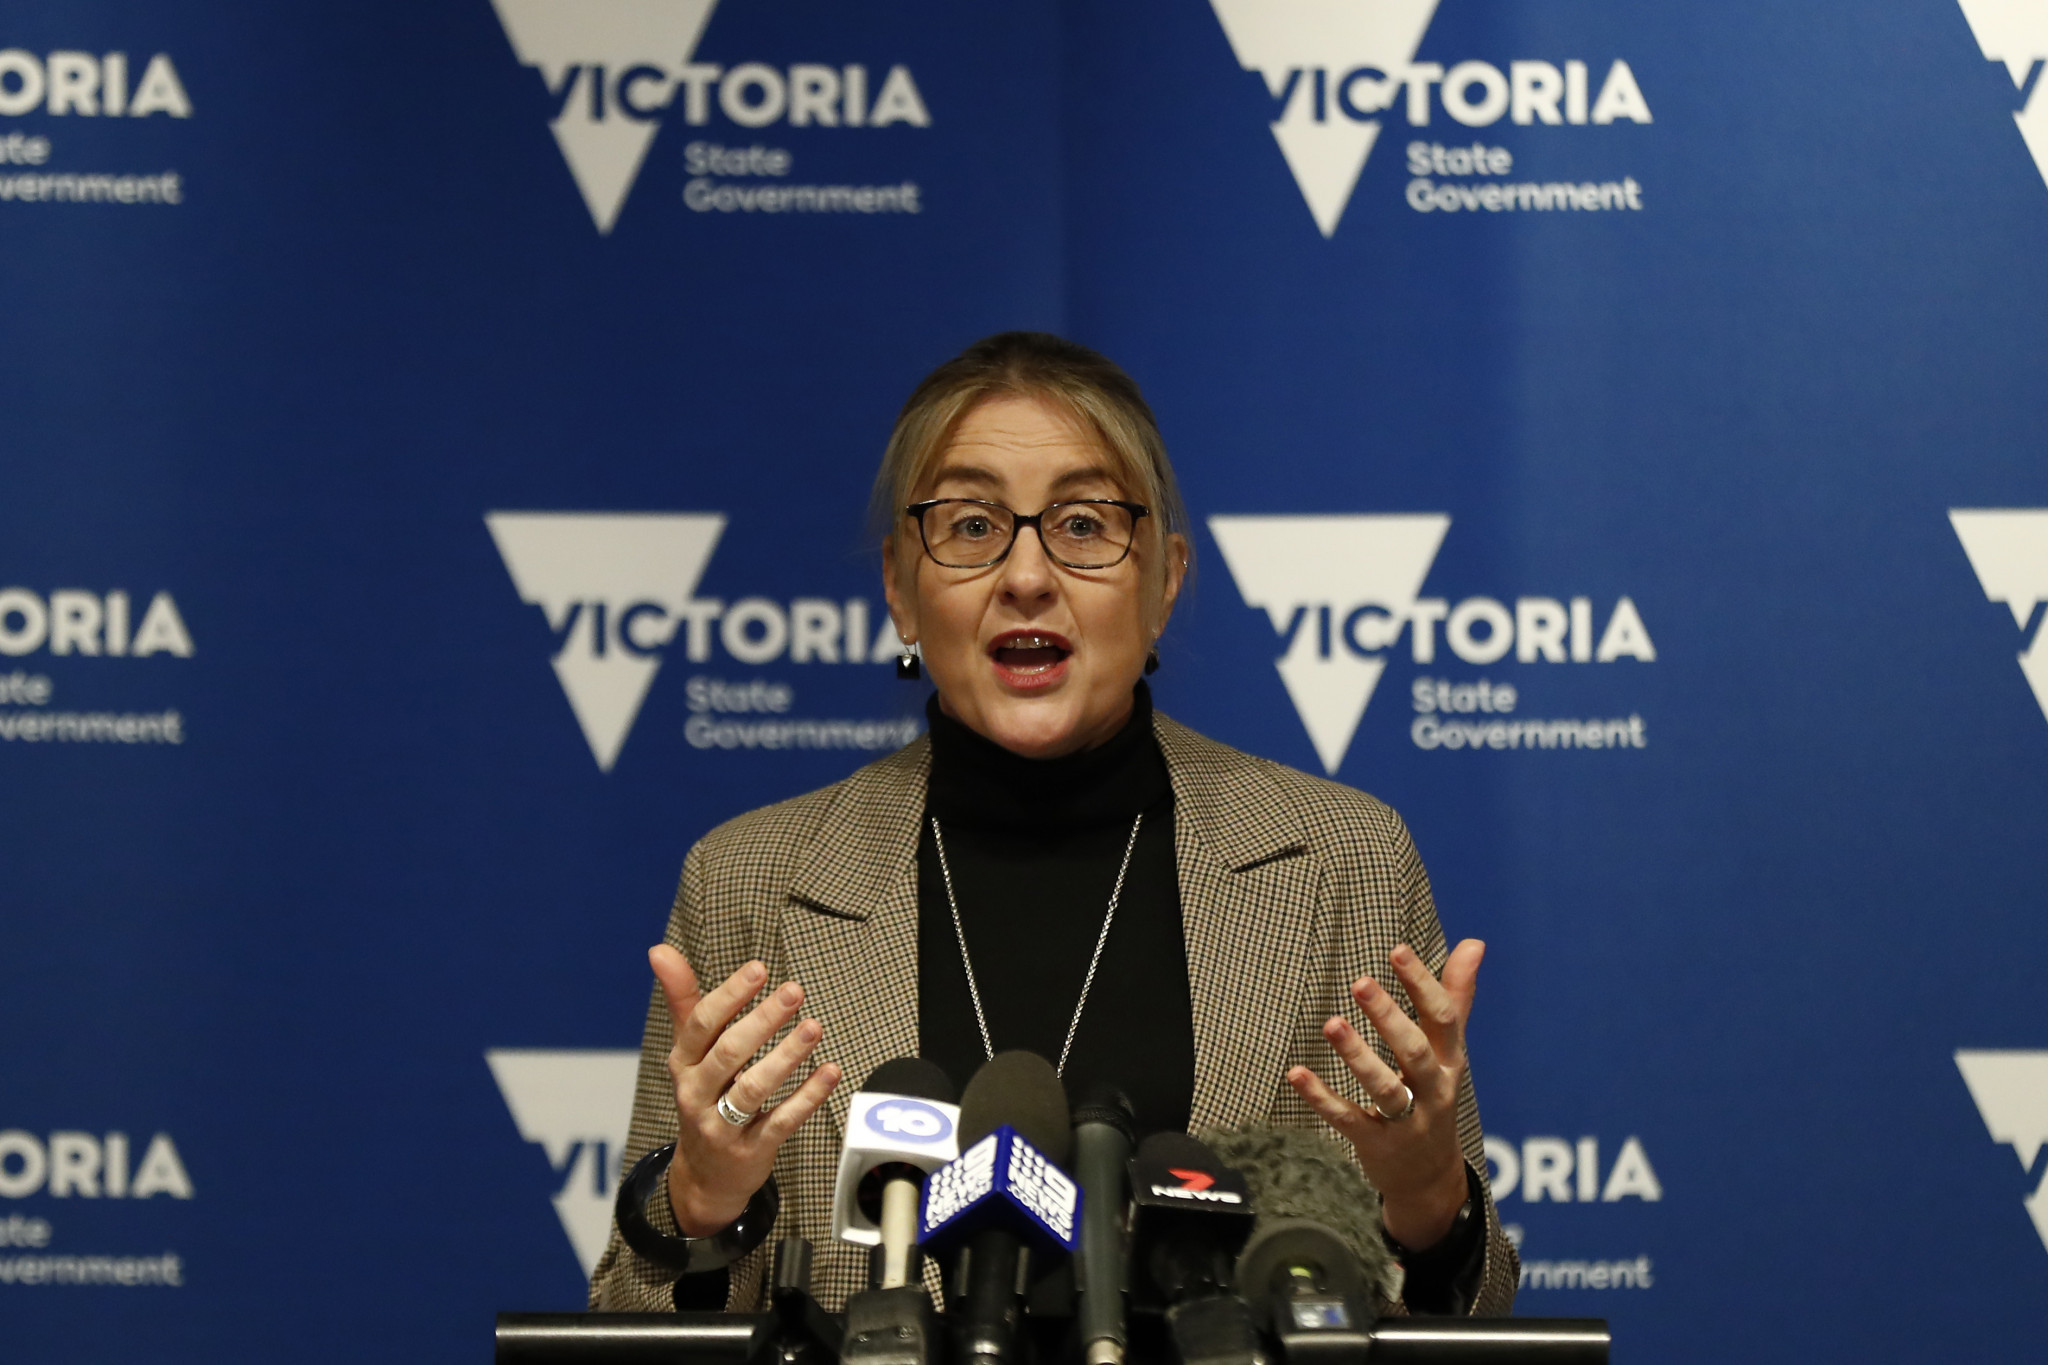 The Victorian Liberal Party has called on Jacinta Allan to face an inquiry into the 2026 Commonwealth Games hosting withdrawal ©Getty Images